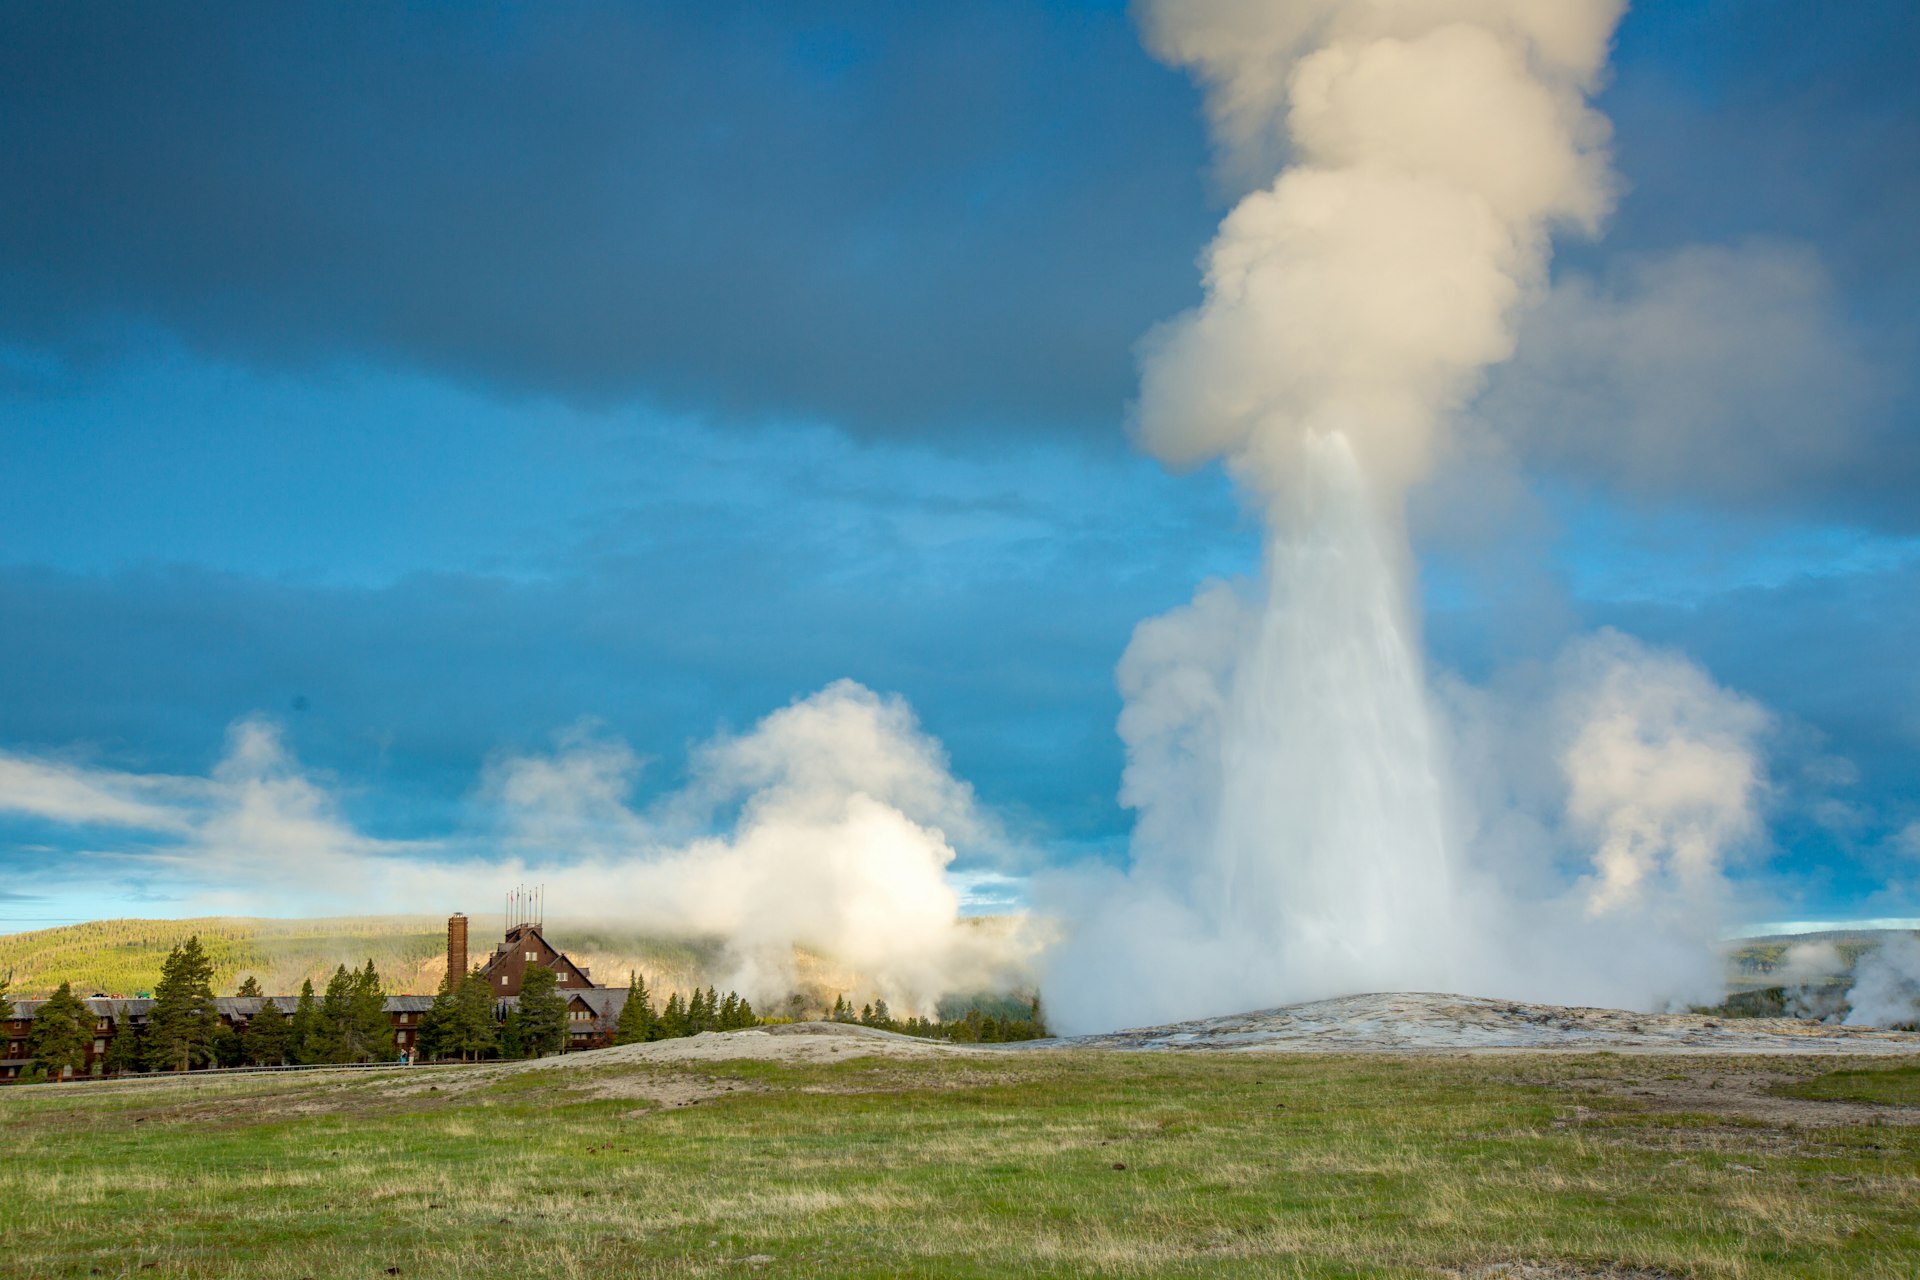 Yellowstone National Park Old Faithful in the foreground with the Inn in the background